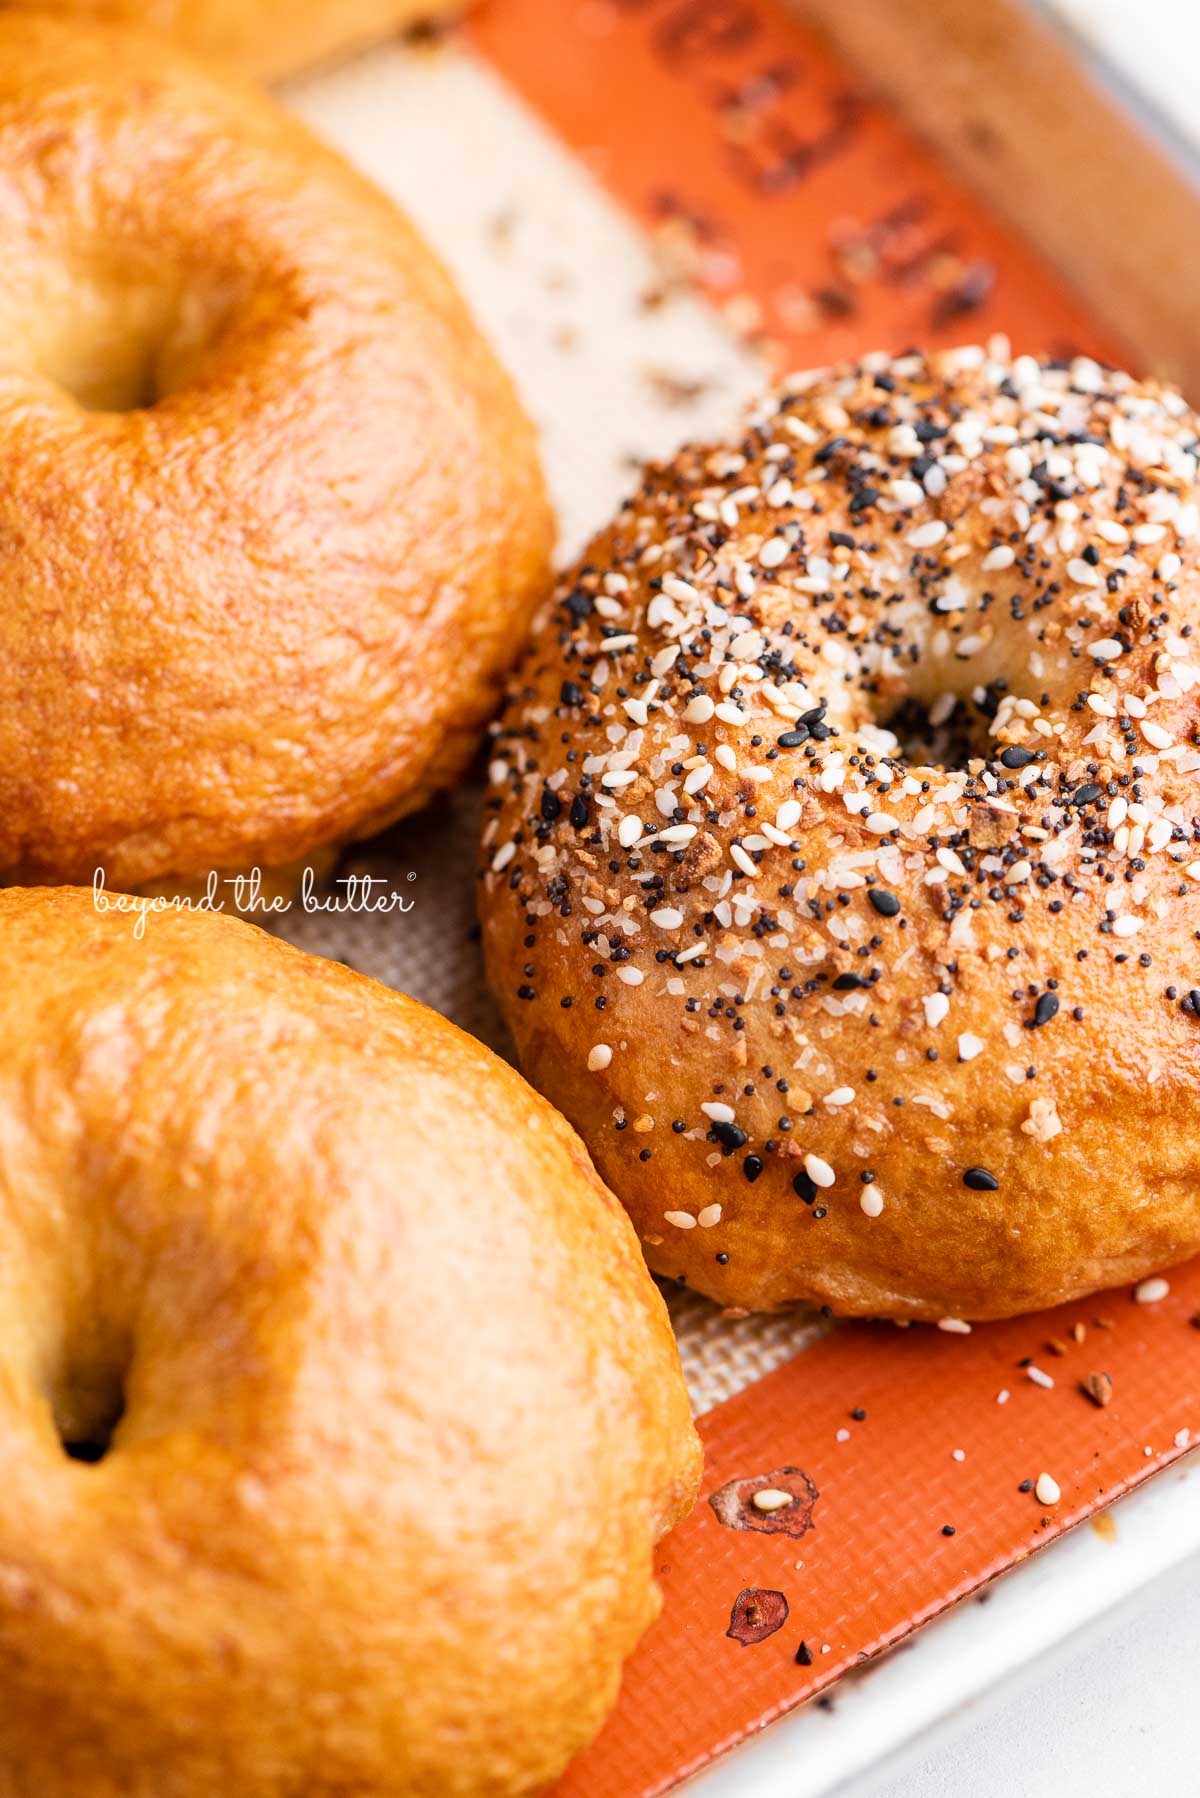 Silicone mat lined baking sheet with just baked homemade bagels | © Beyond the Butter®